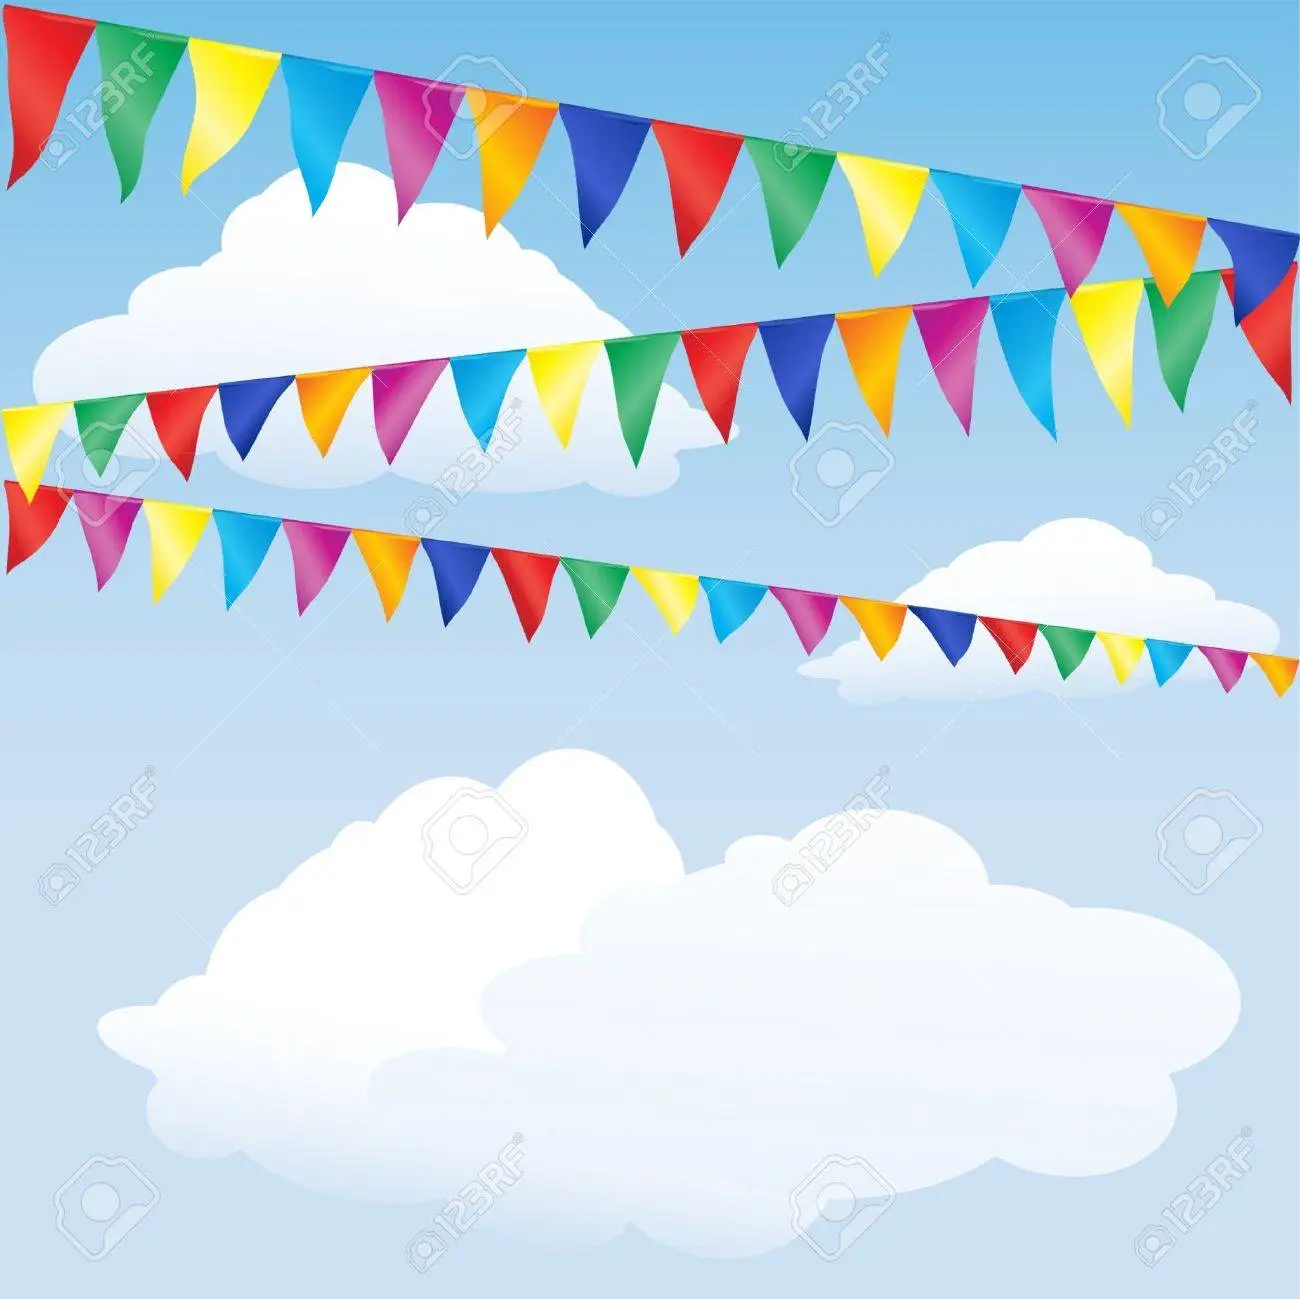 three strings of colourful bunting against blue skies with white fluffy clouds